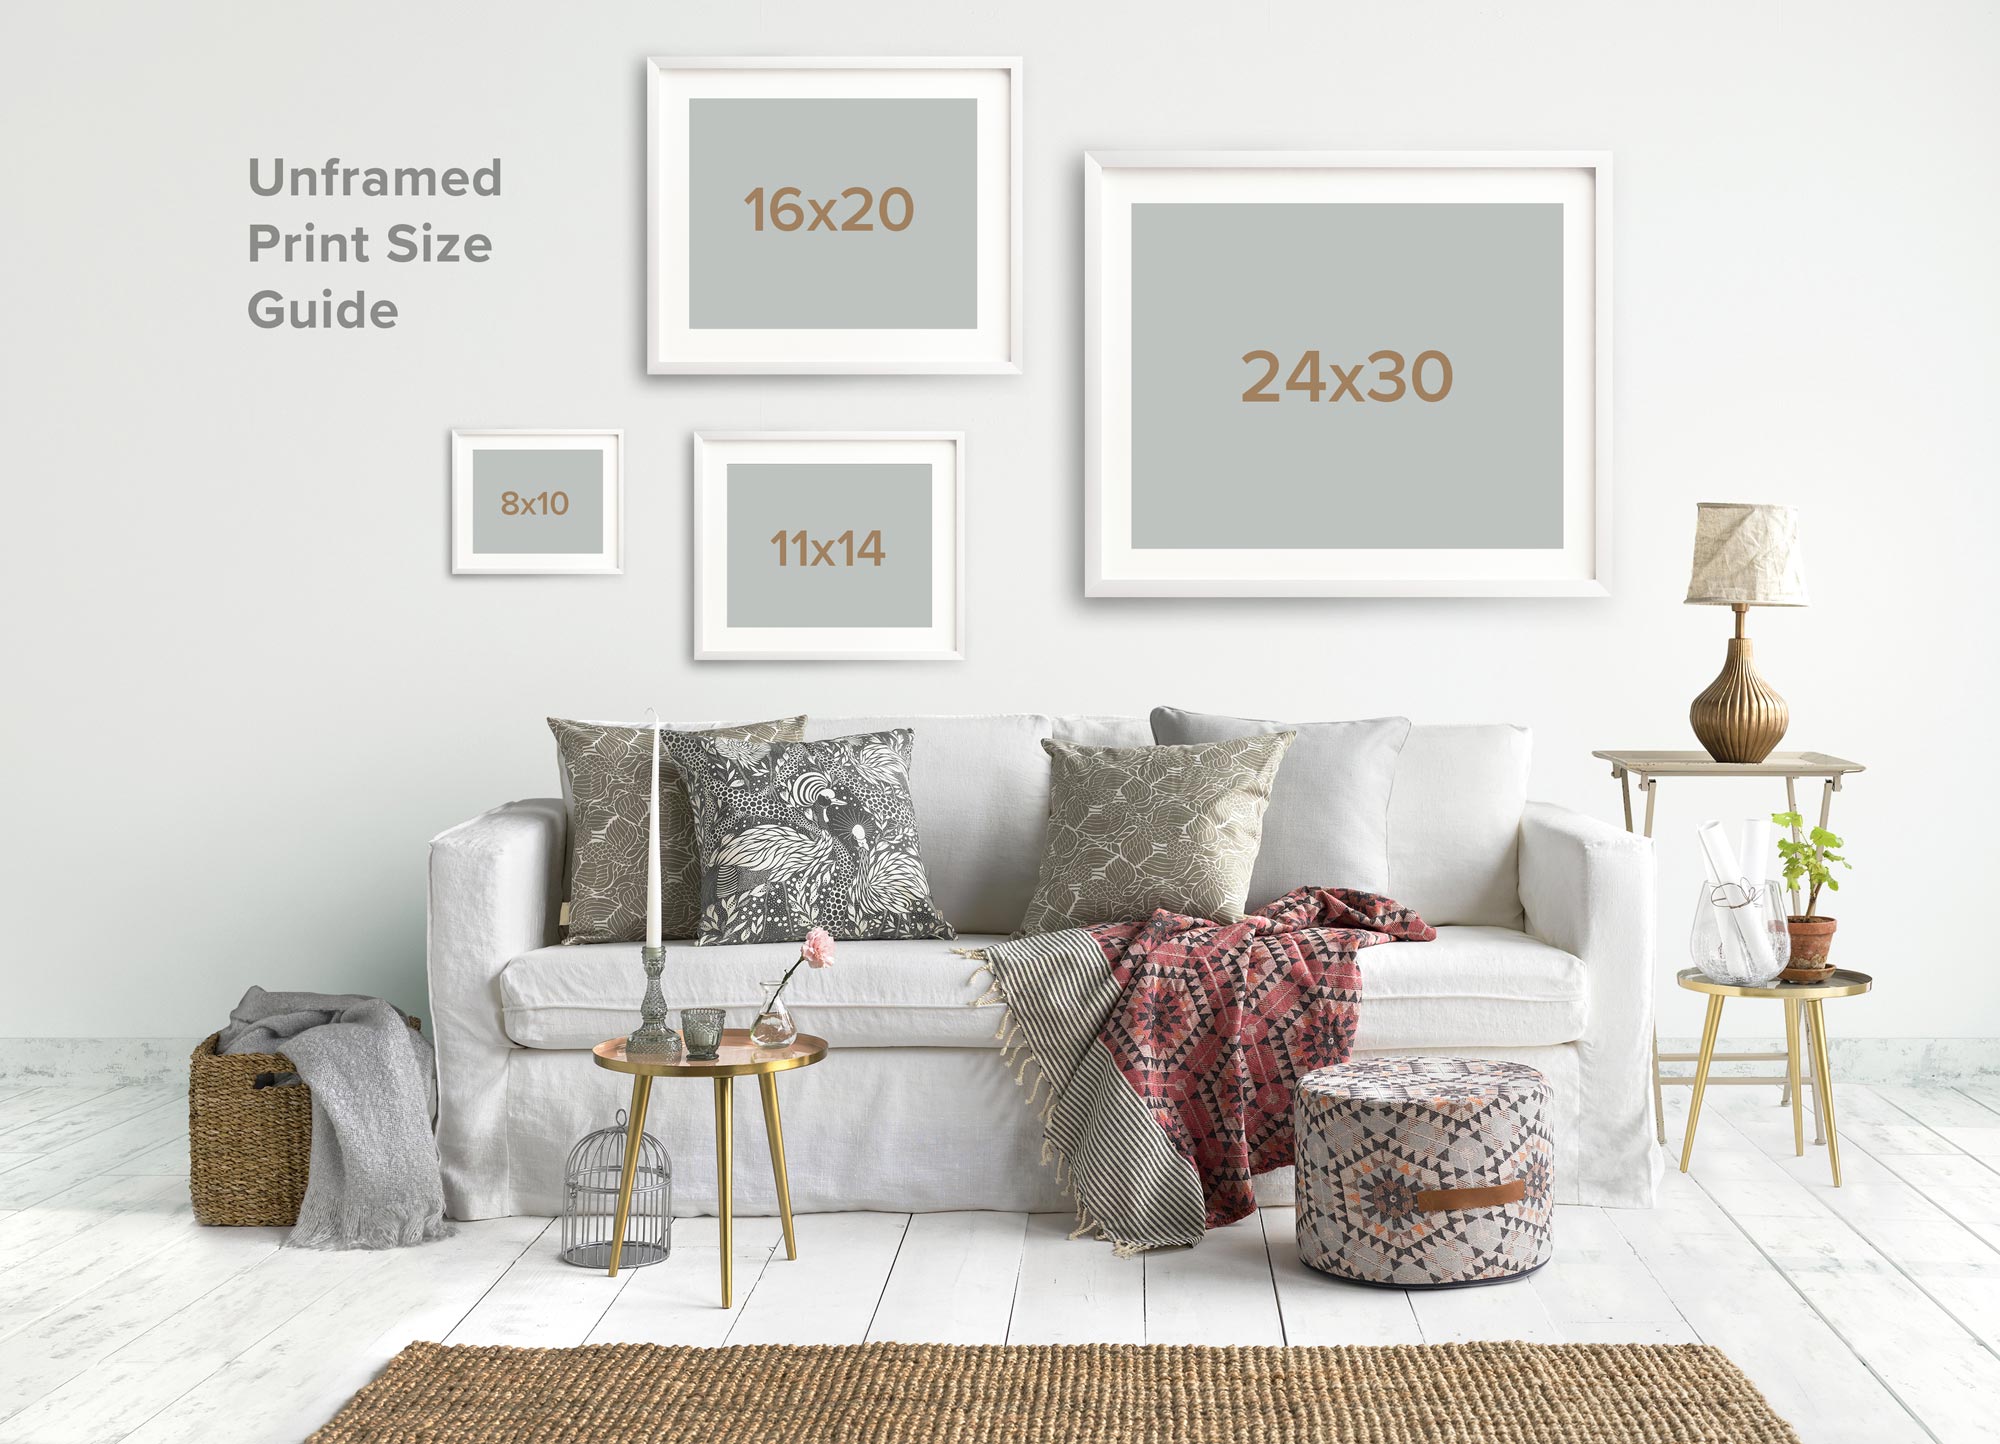 A cozy living room scene featuring a white sofa adorned with pillows, an Offley Green &#39;Santa Monica Pier&#39; print on archival photographic paper, and a size guide for the frames. There&#39;s a lamp, side tables.